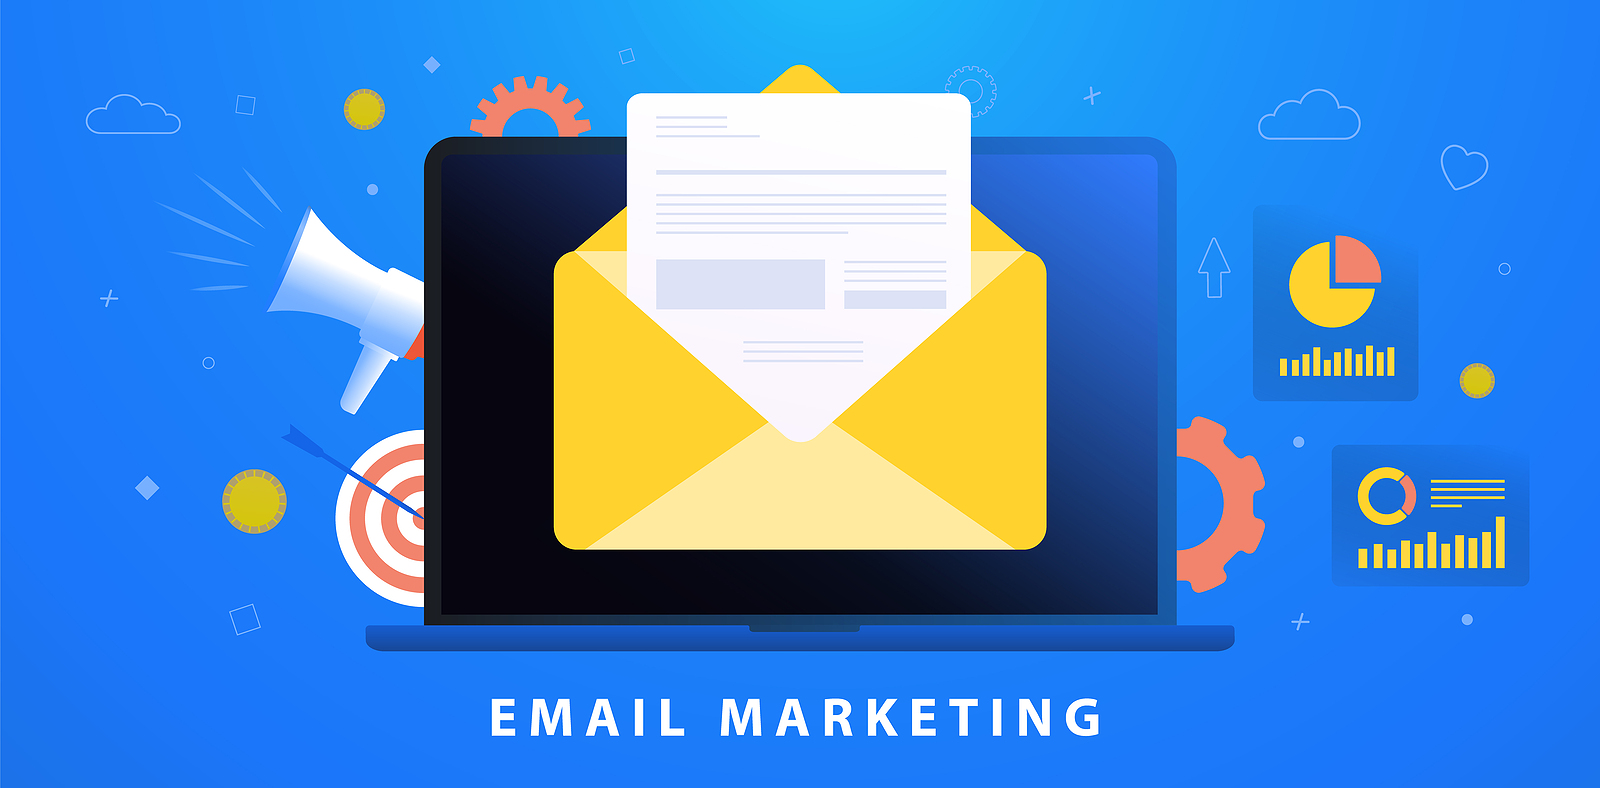 Email Marketing Campaign concept. Digital Inbound advertising (useful newsletter, interesting promotional material) or Outbound (cold emails, spam) advertisement business strategy.